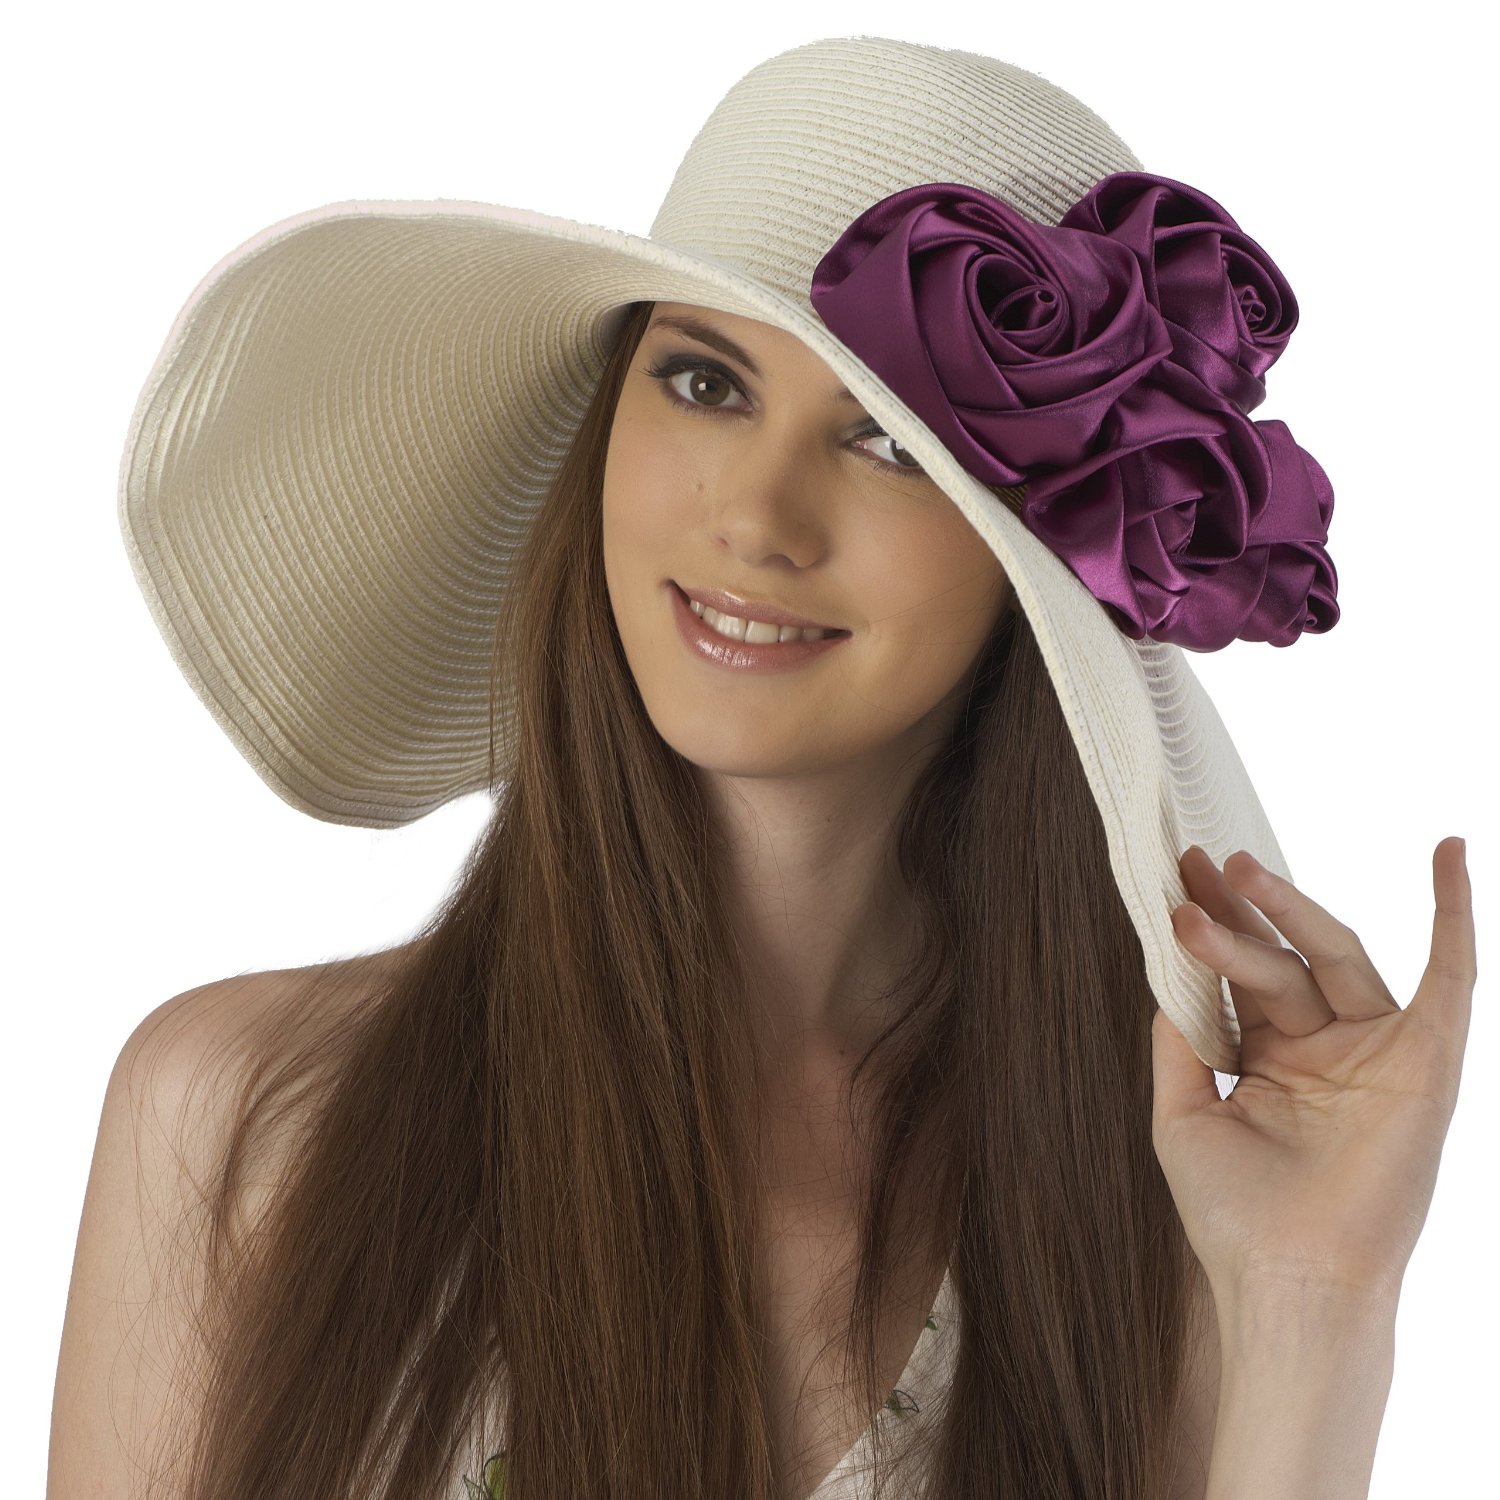 Awesome Fashion Stylish Summer Hats For Women